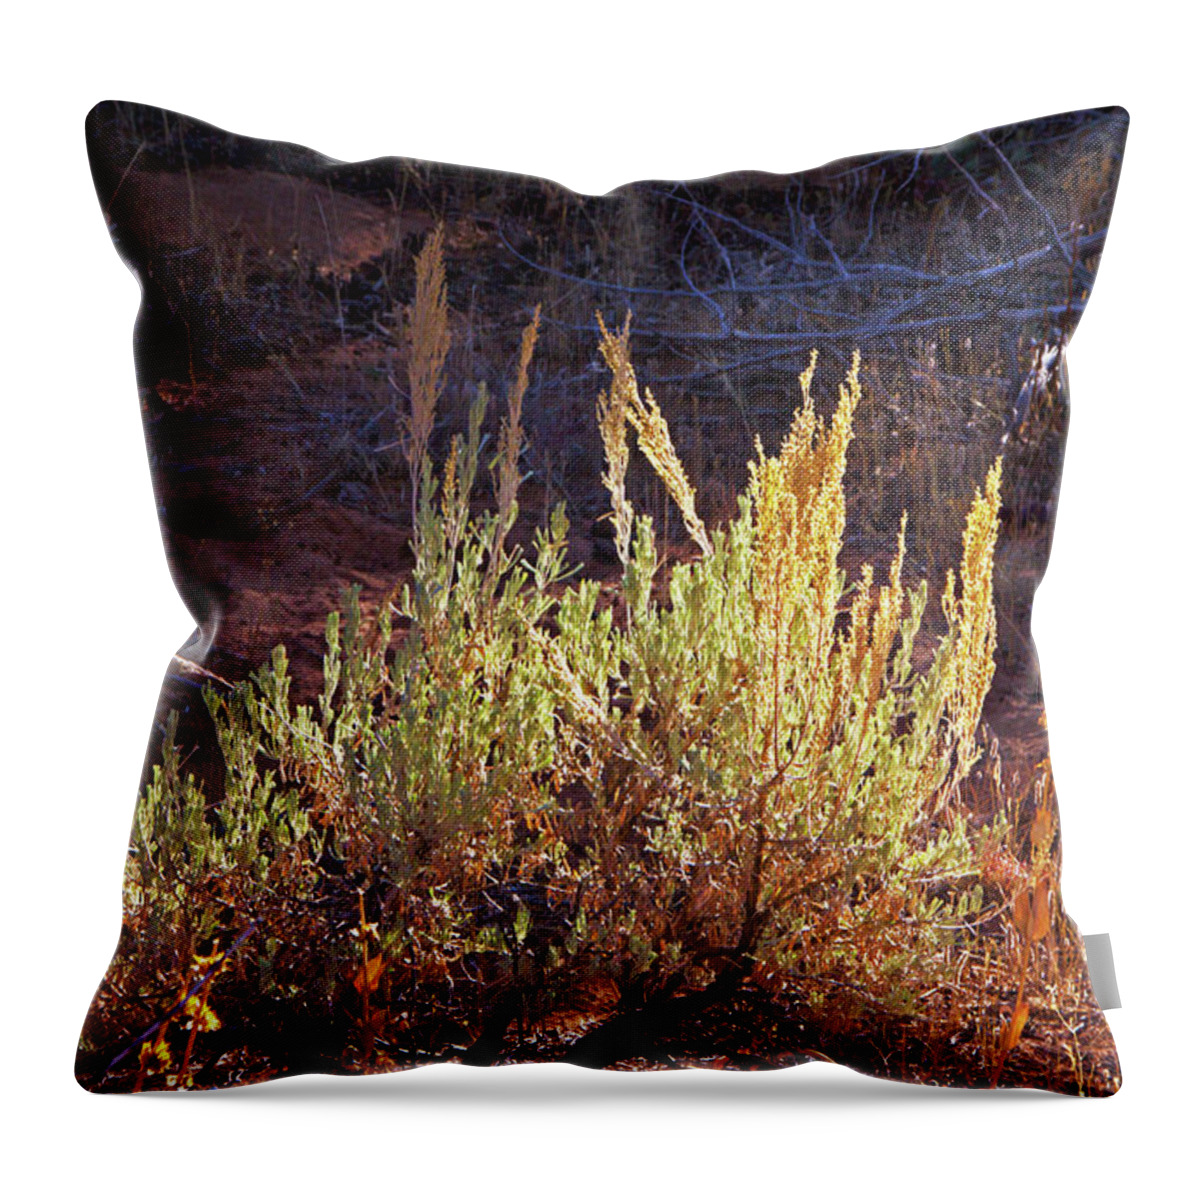 Kanab Coral Sand Dunes Desert Scrub Greens And Yellows Throw Pillow featuring the photograph Kanab Coral Sand Dunes desert scrub greens and yellows 6670 by David Frederick